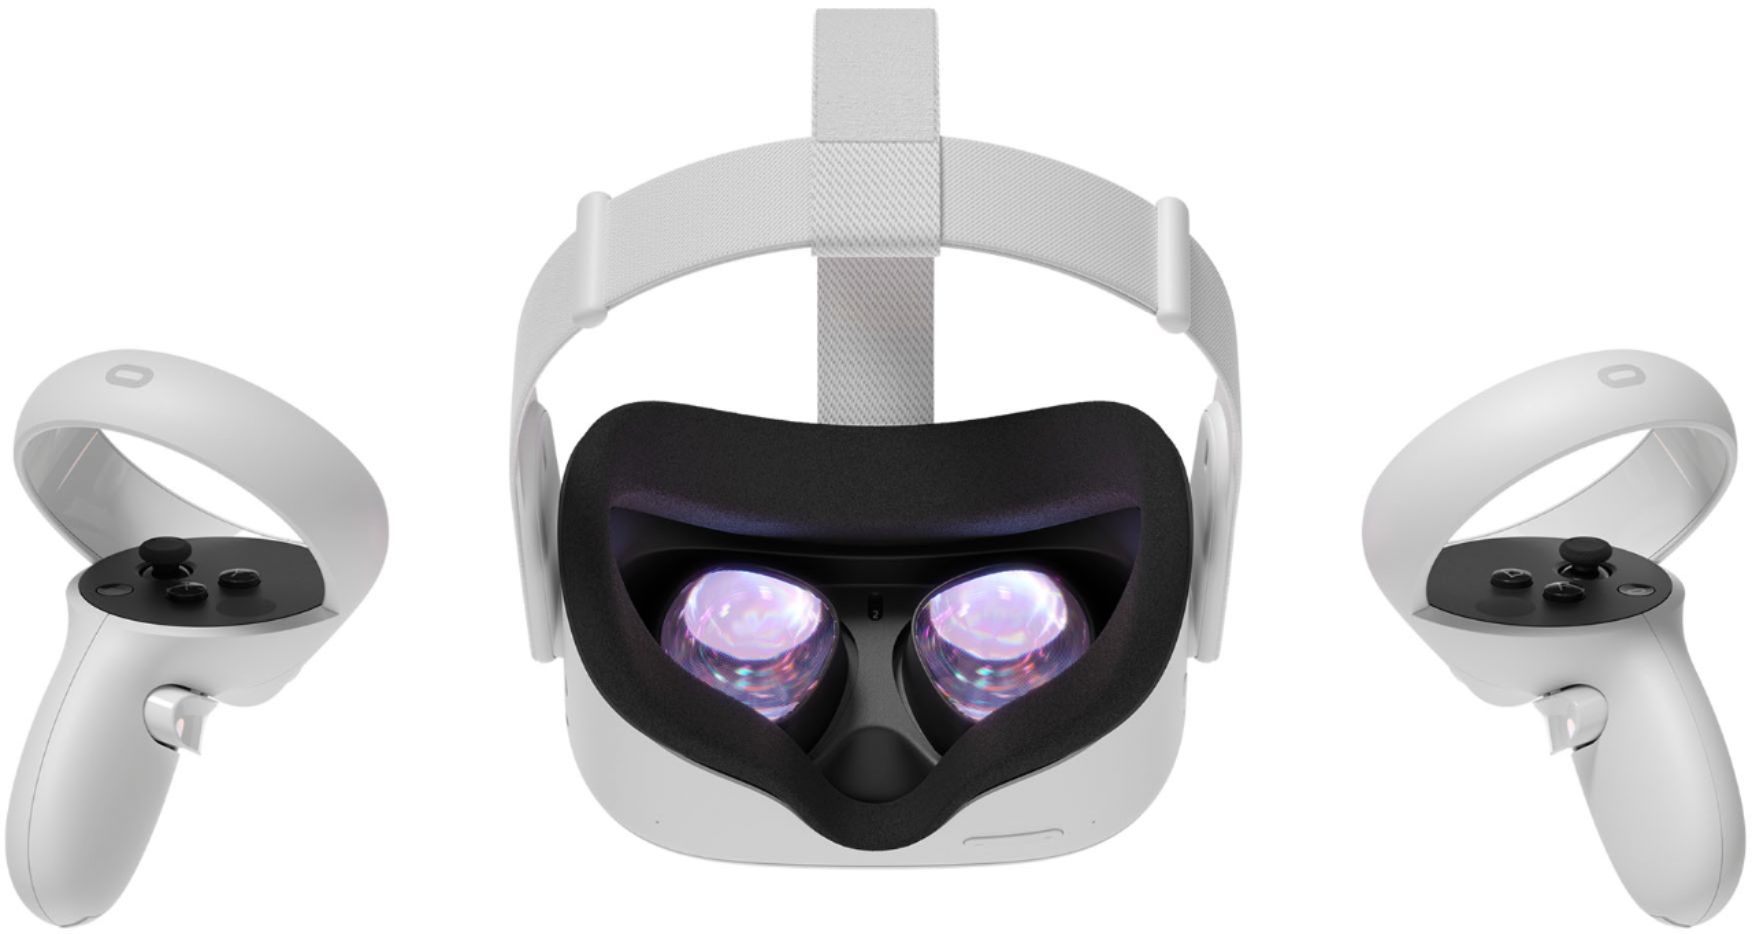 places to buy oculus quest